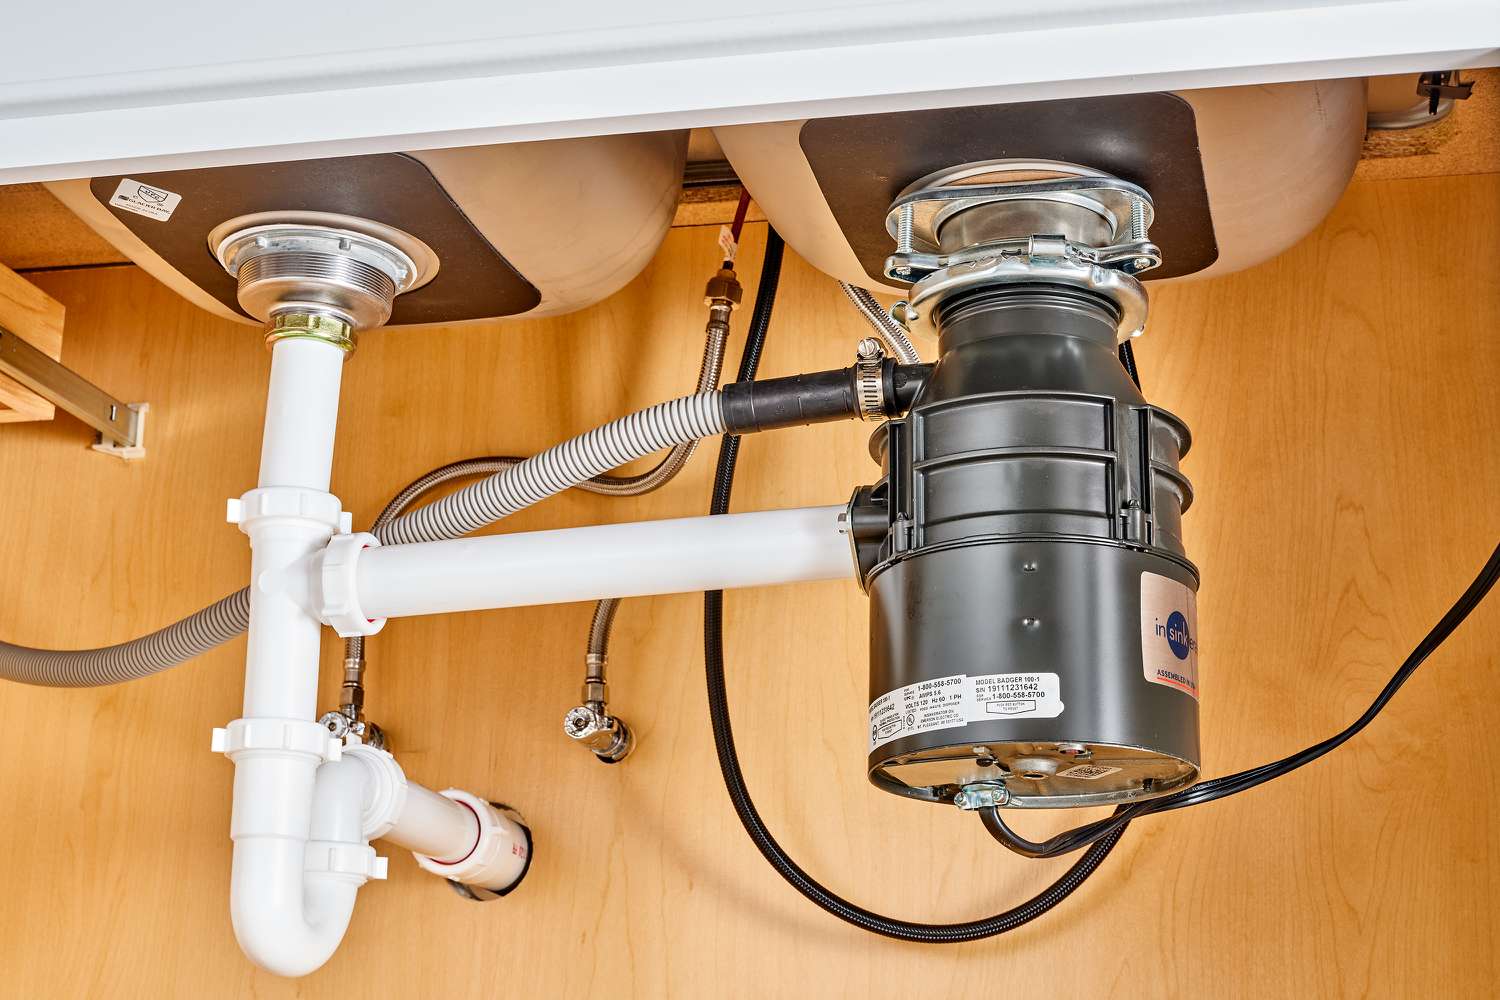 How To Plumb A Double Kitchen Sink With Disposal And Dishwasher ...